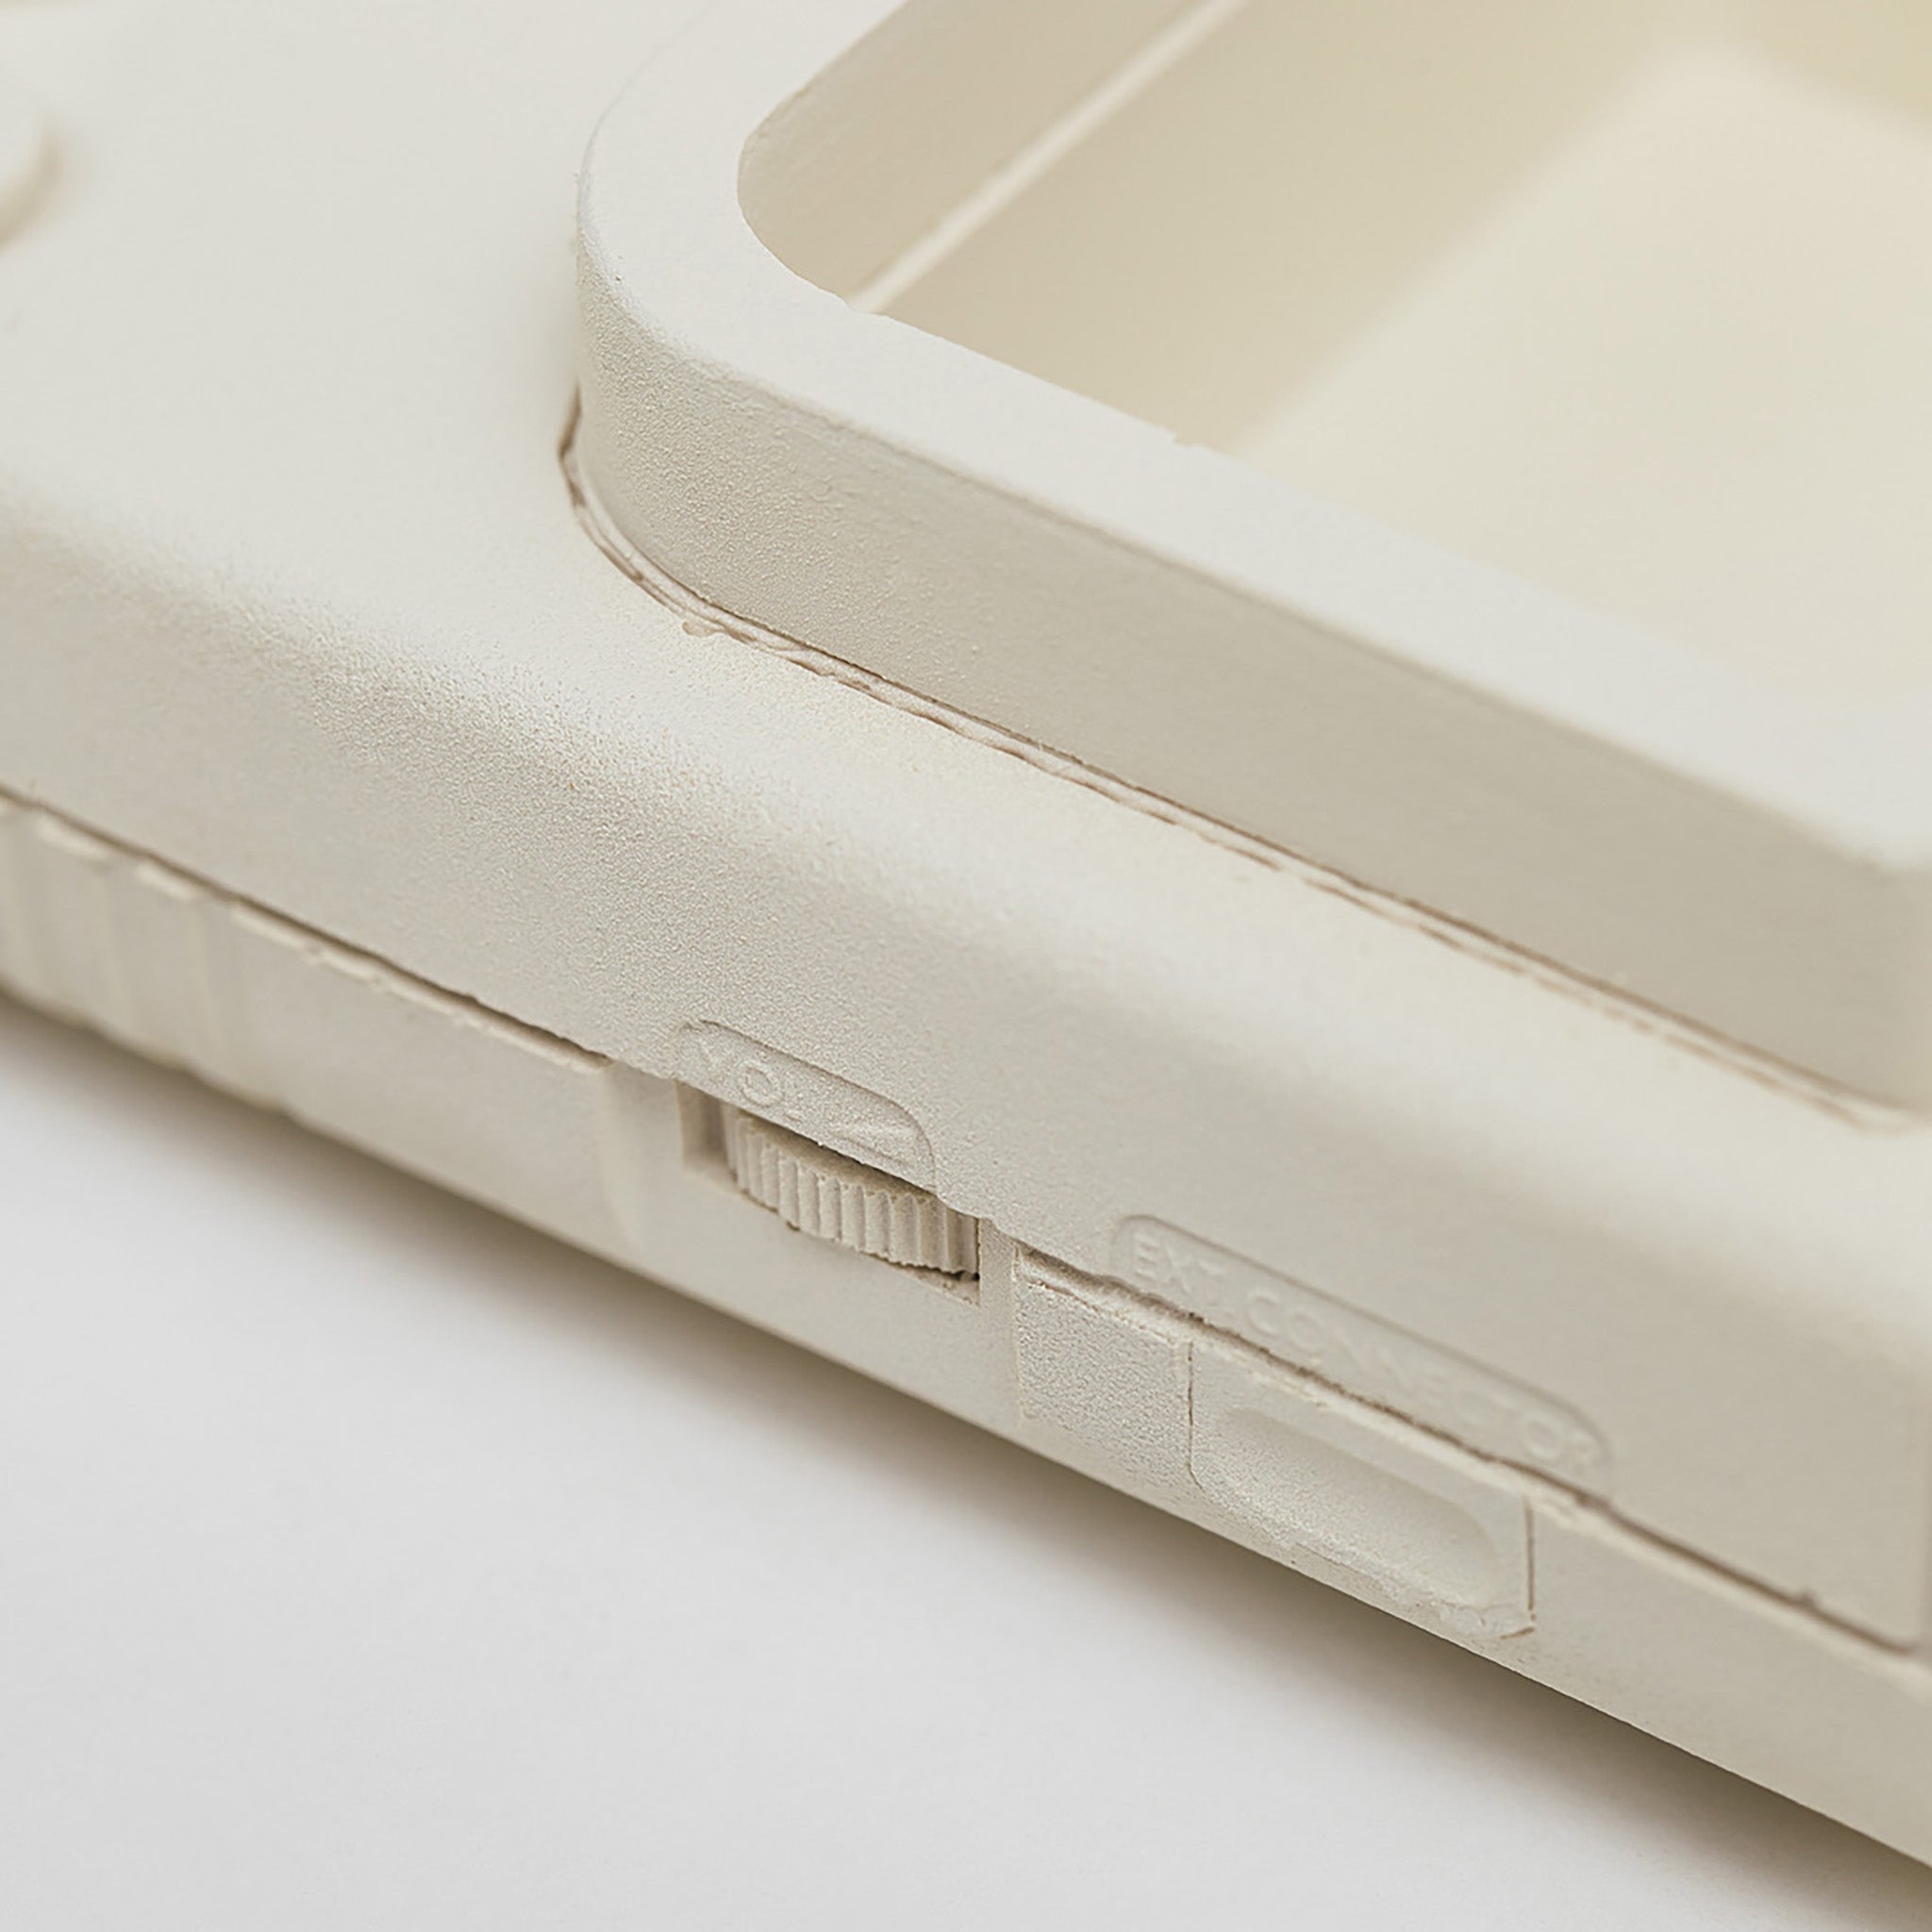 Close up of fine details on the Nintendo gameboy video game console casting